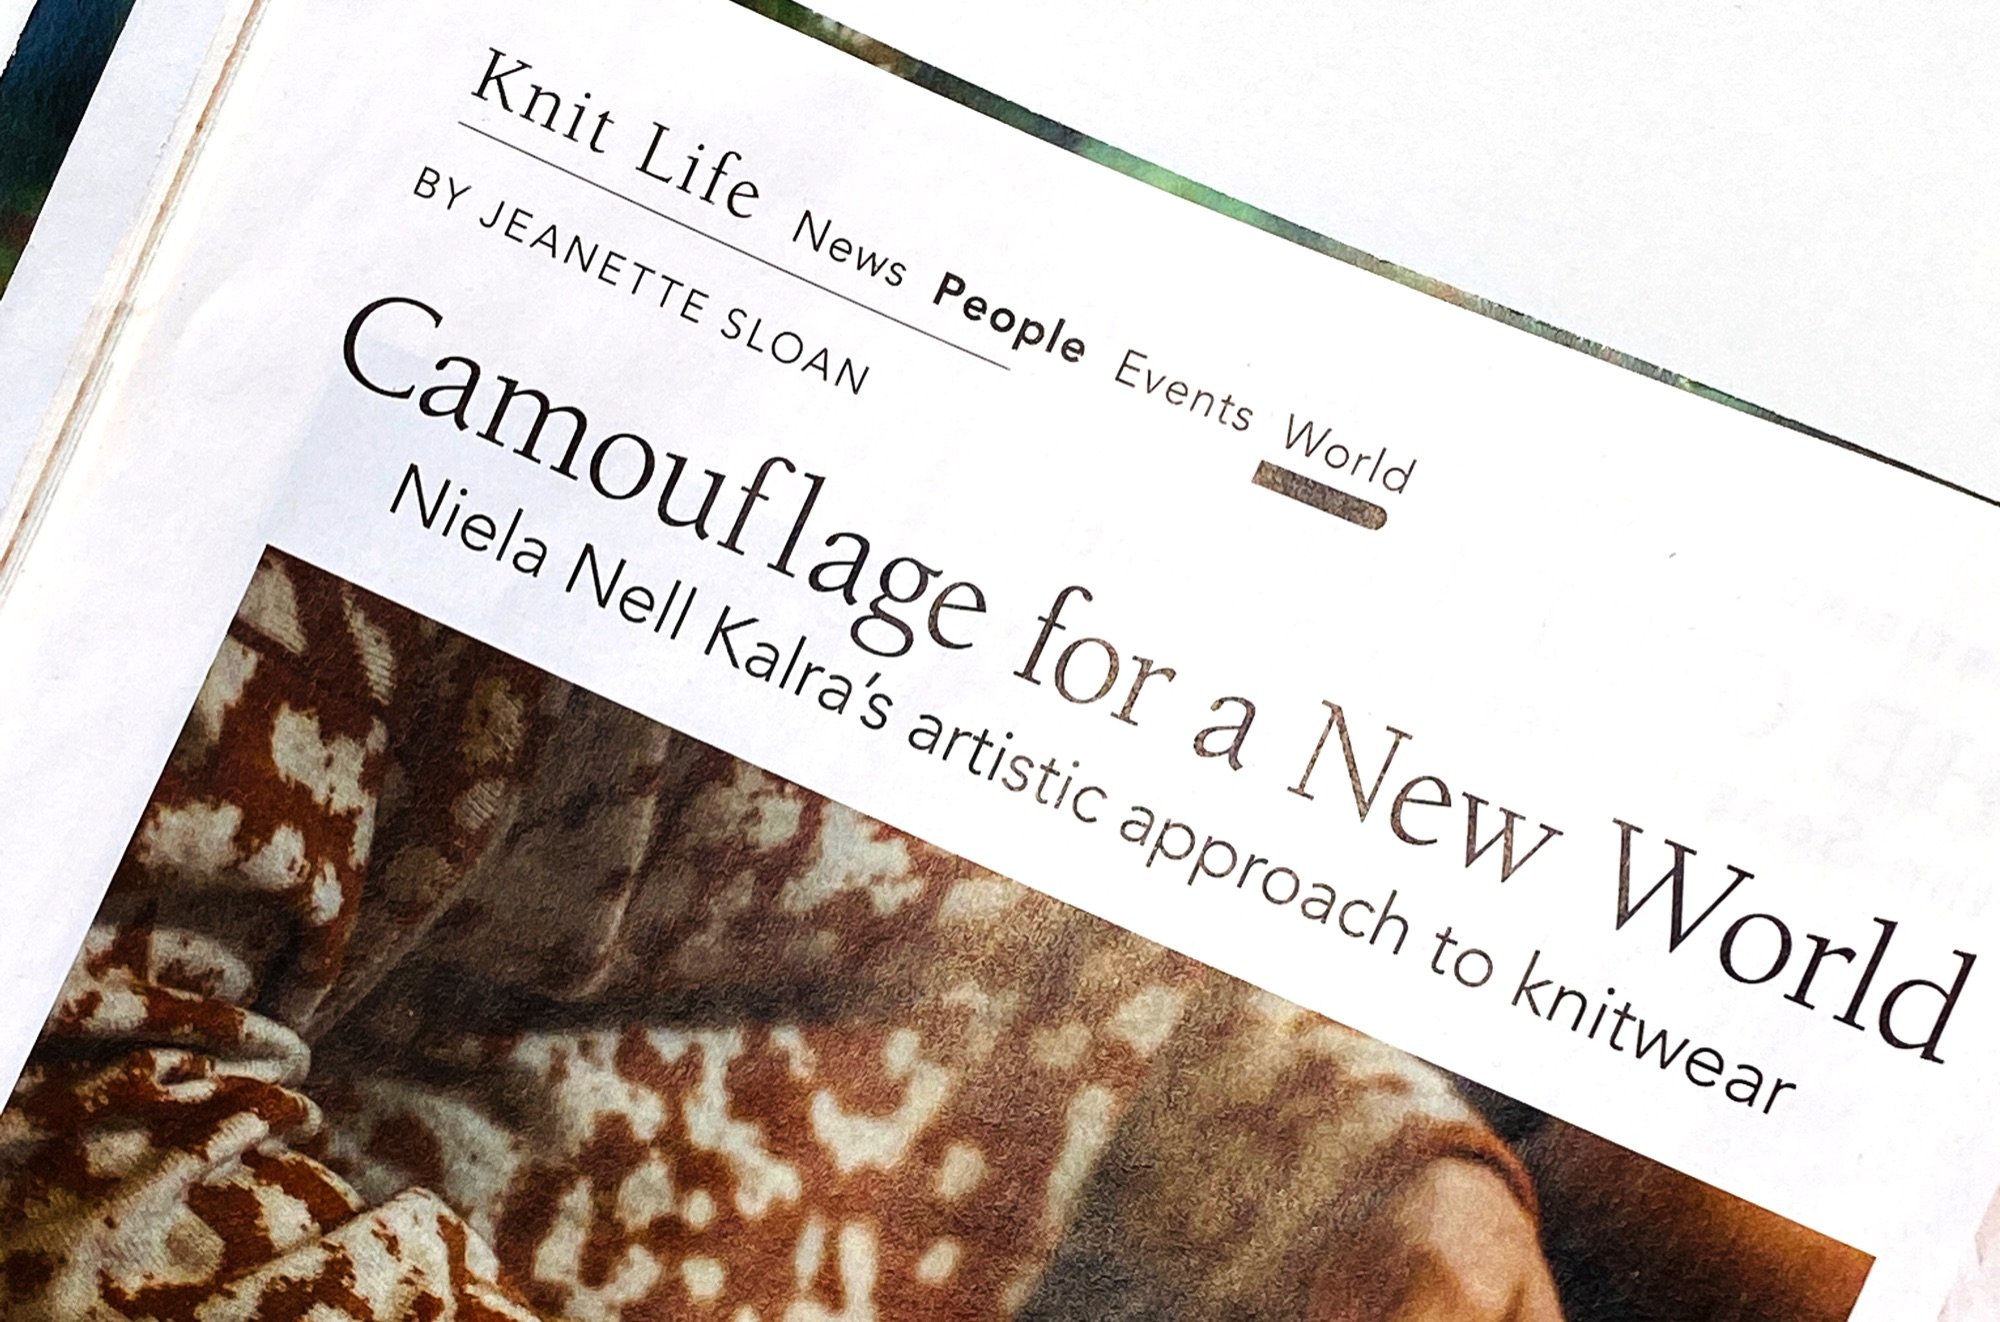 Close up of Camouflage for a New World article written by Jeanette Sloan for Vogue Knitting Magazine